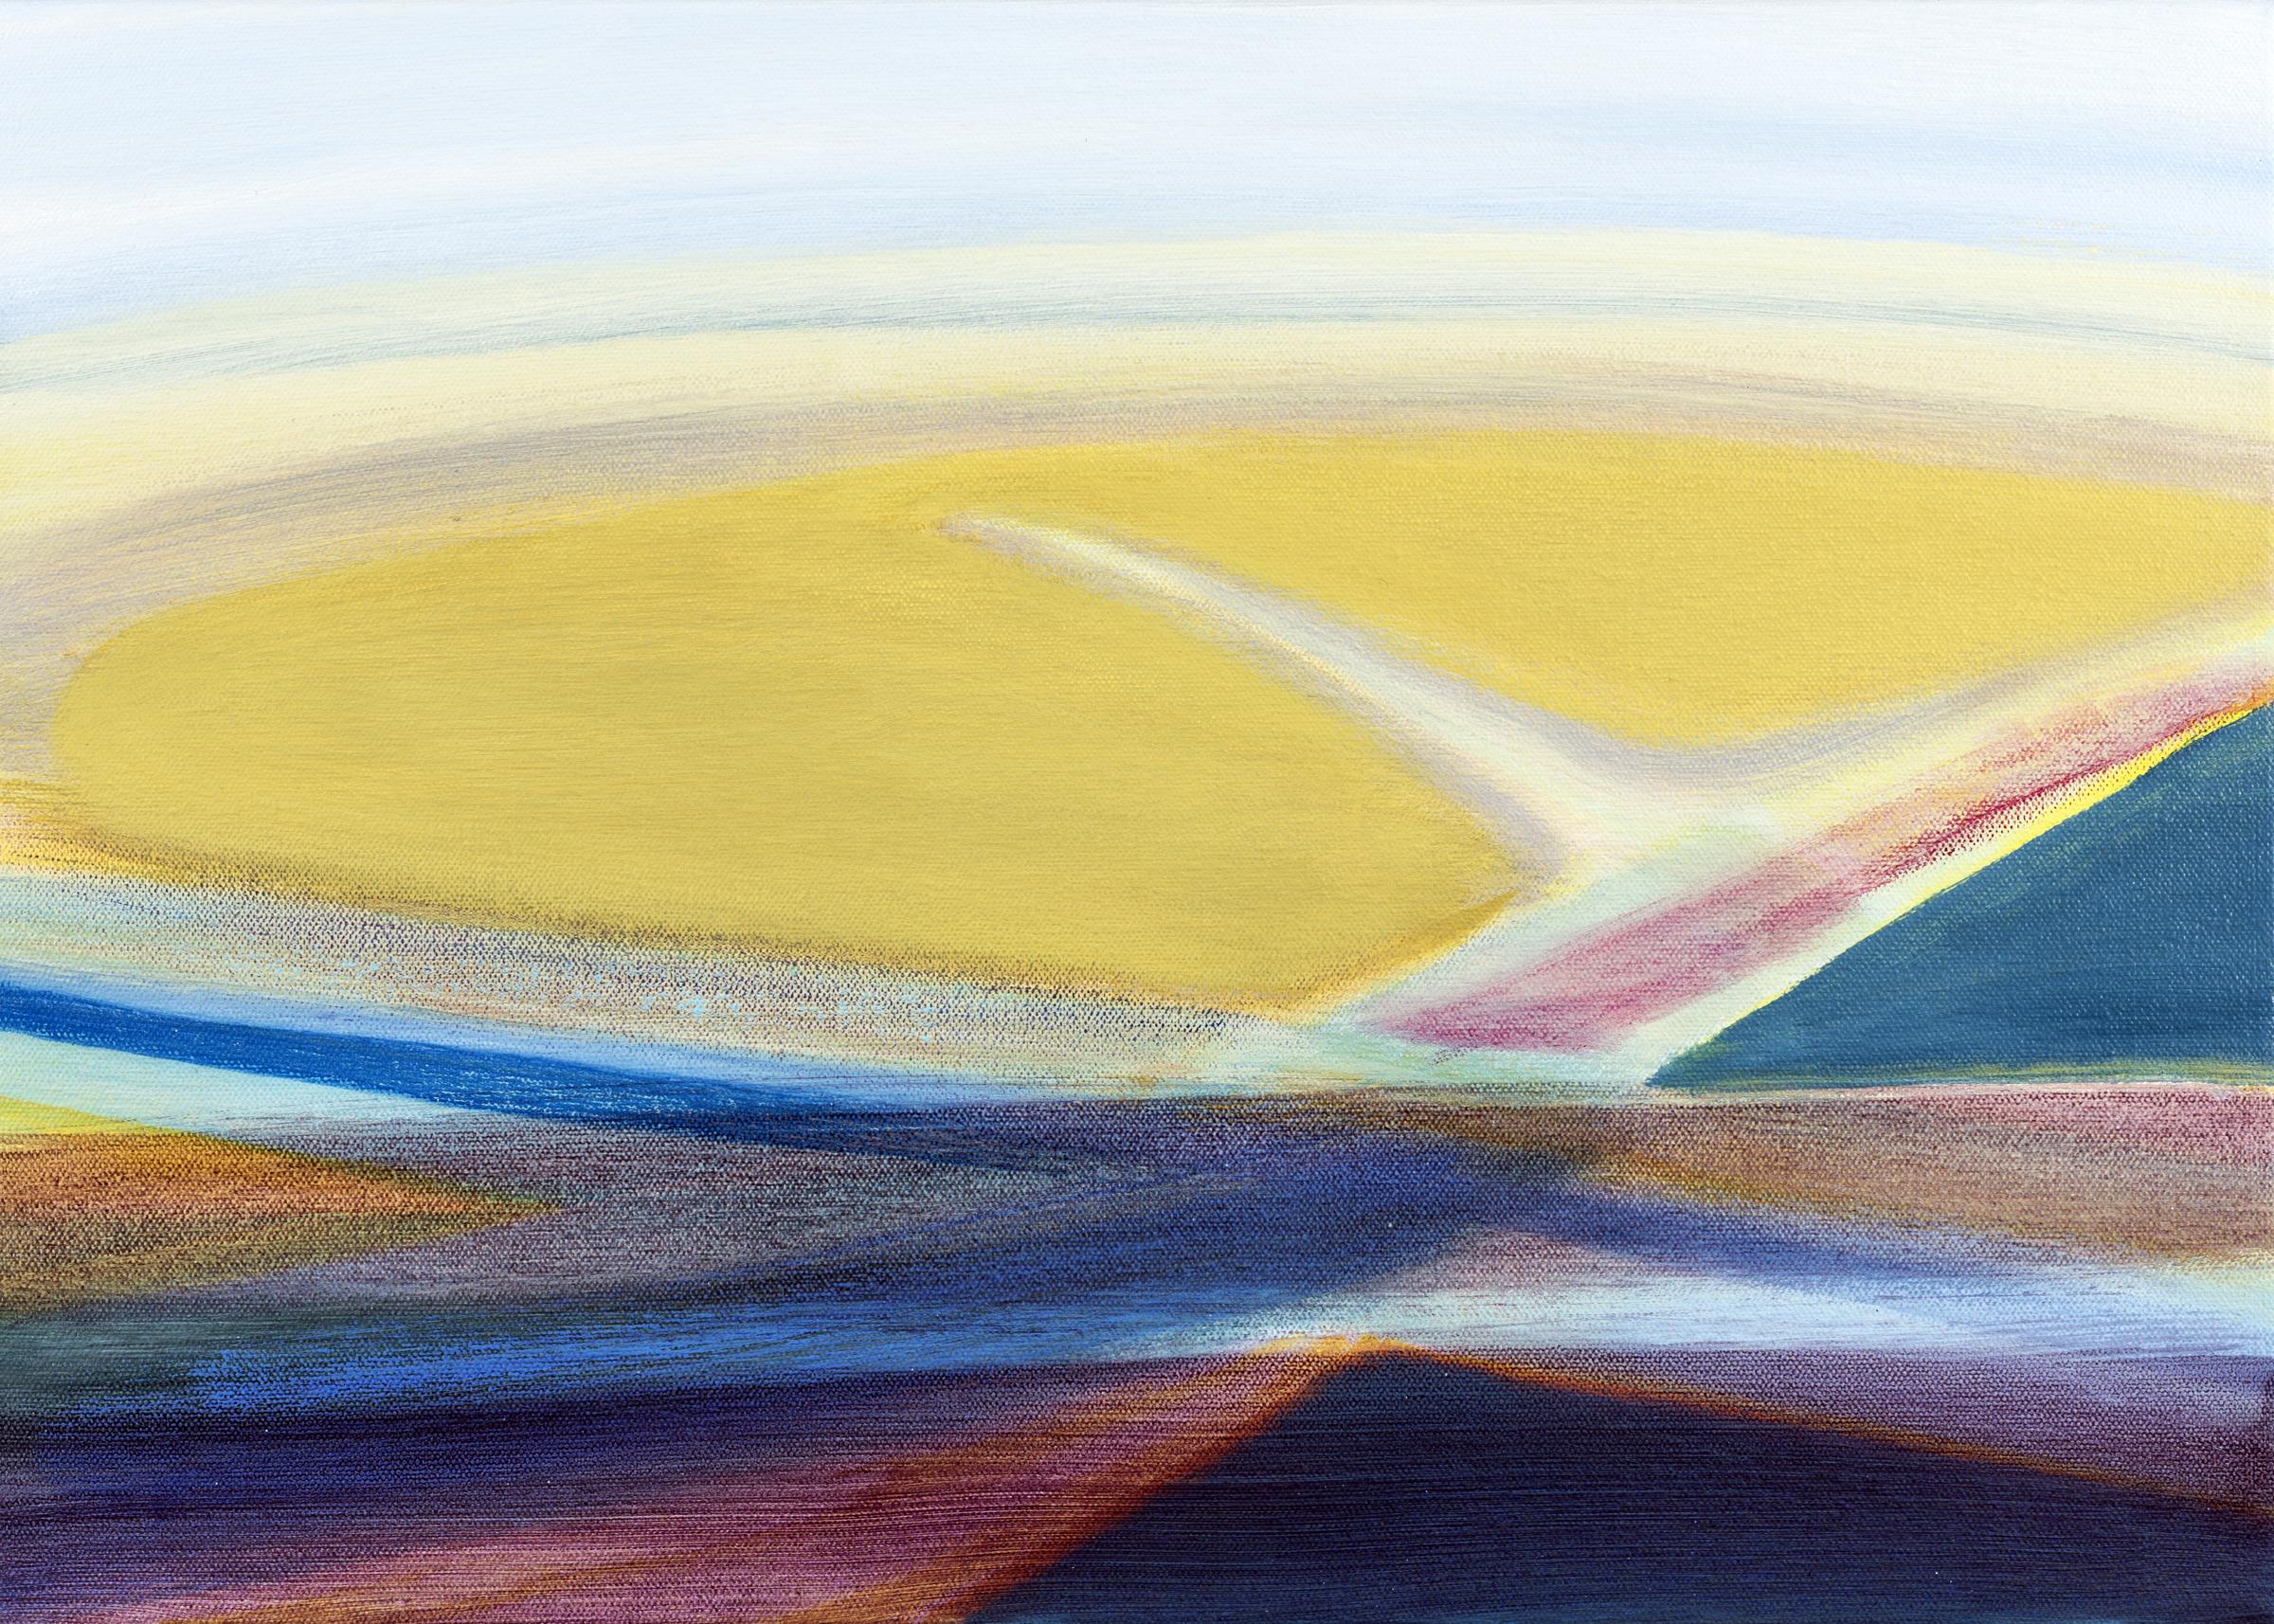 Susan Maakestad Landscape Painting - 'Overview' - abstract landscape - color block - impressionism - stripes